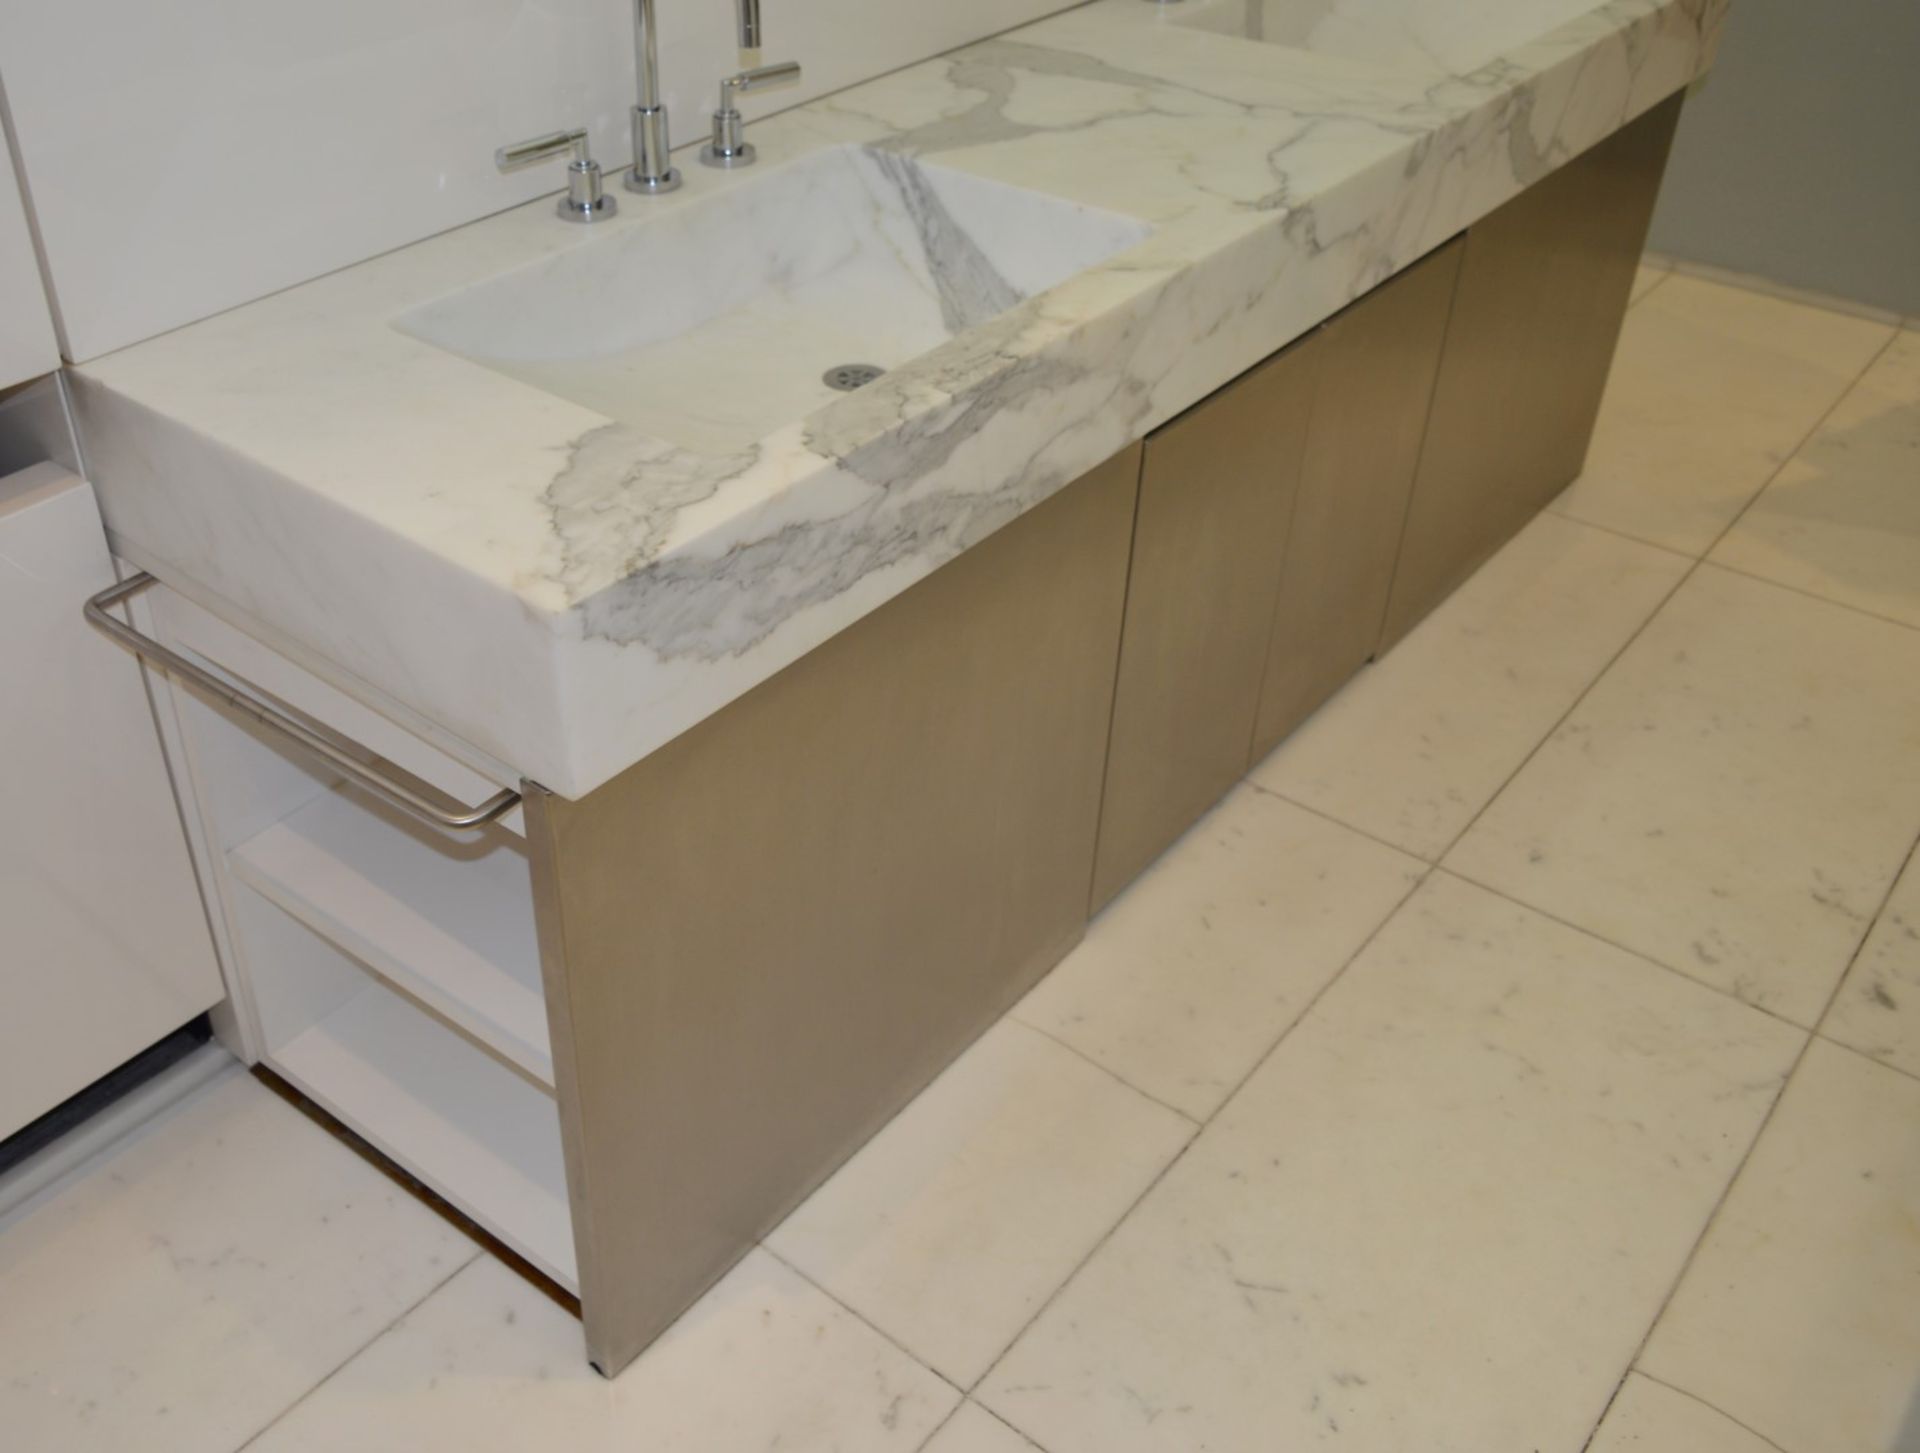 1 x Bespoke His & Hers Marble Bathroom Vanity Unit - Exquisite 7ft Twin Marble Sink Basin With Two - Image 3 of 25